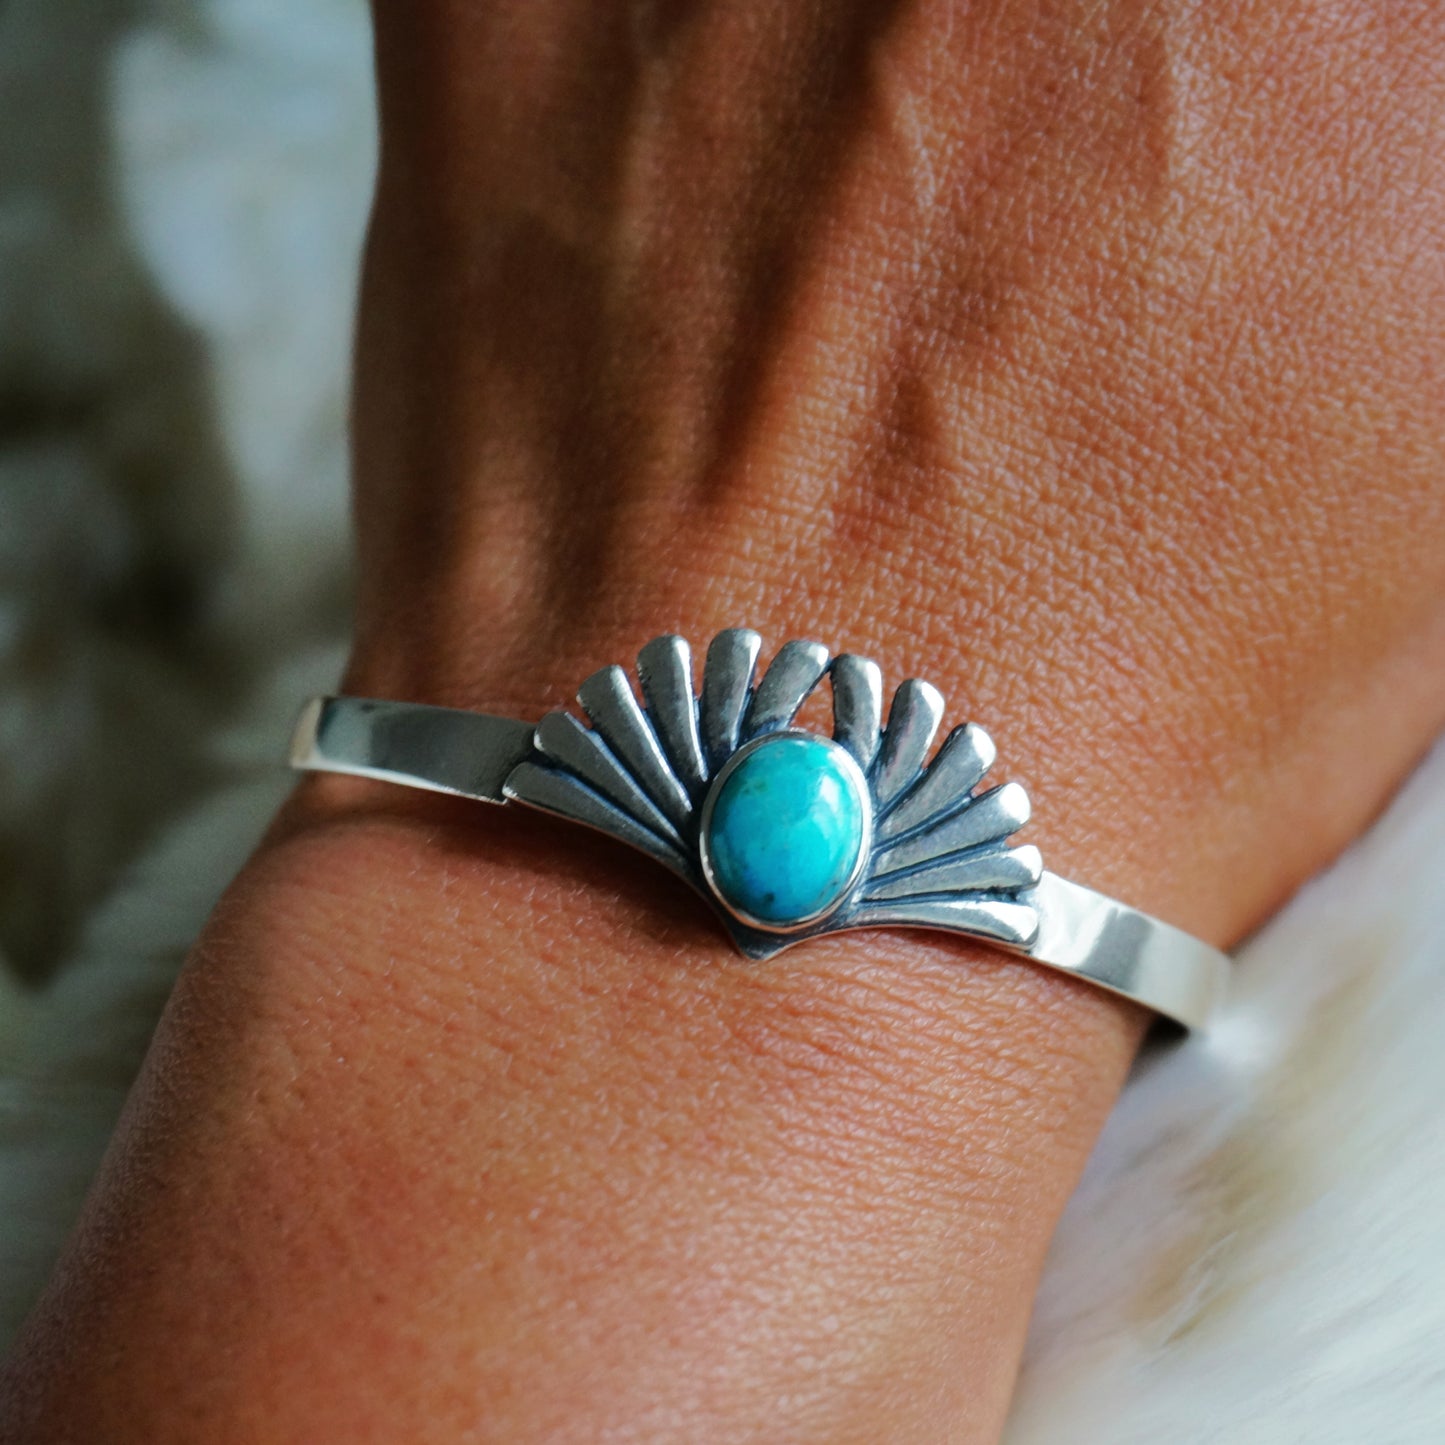 Load image into Gallery viewer, Prayer Turquoise Bracelet - SOWELL JEWELRY
